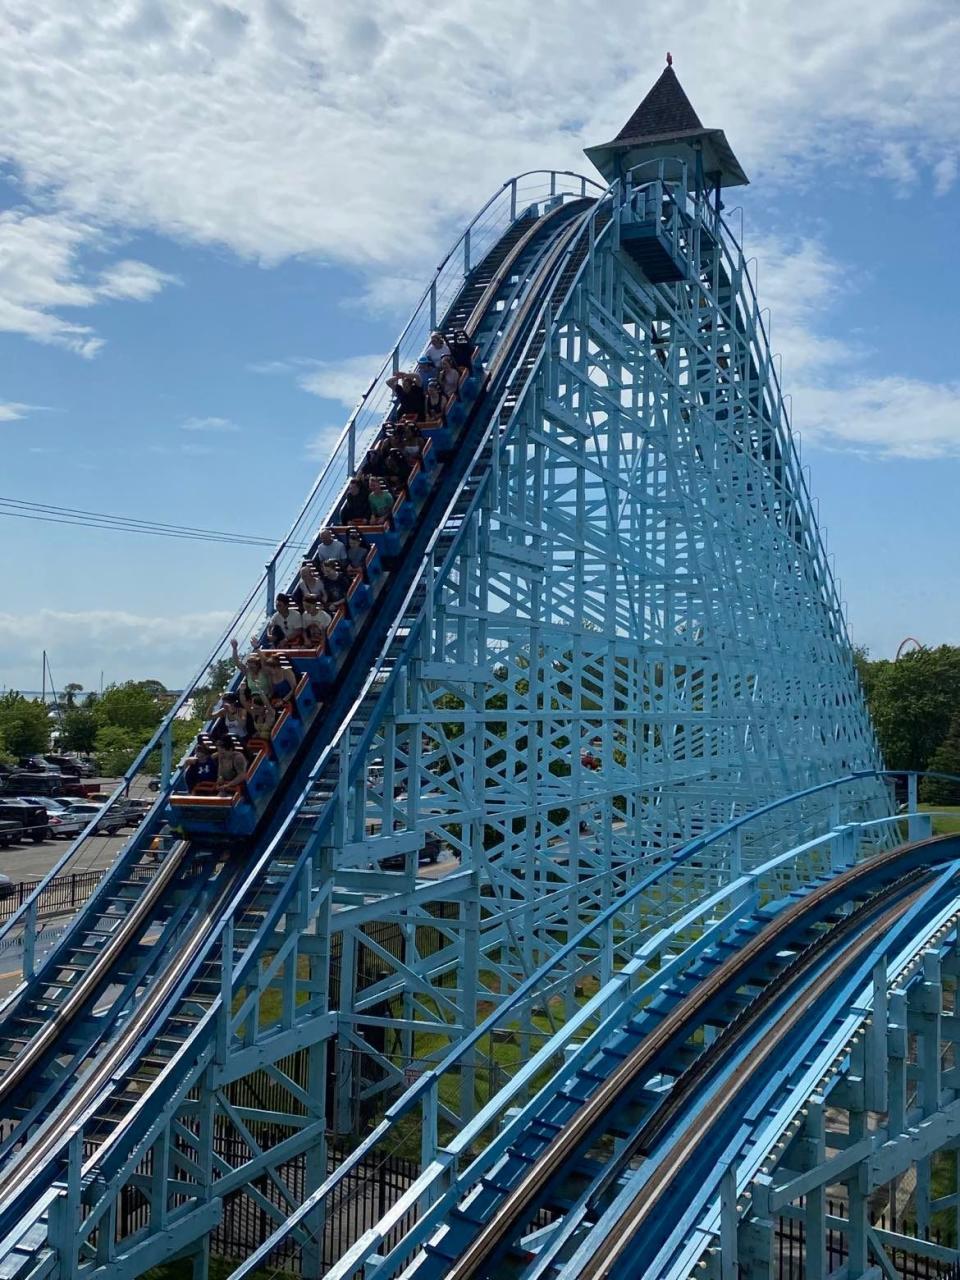 Cedar Point's oldest roller coaster is the Blue Streak, among nearly 20 coasters at the Ohio amusement park.